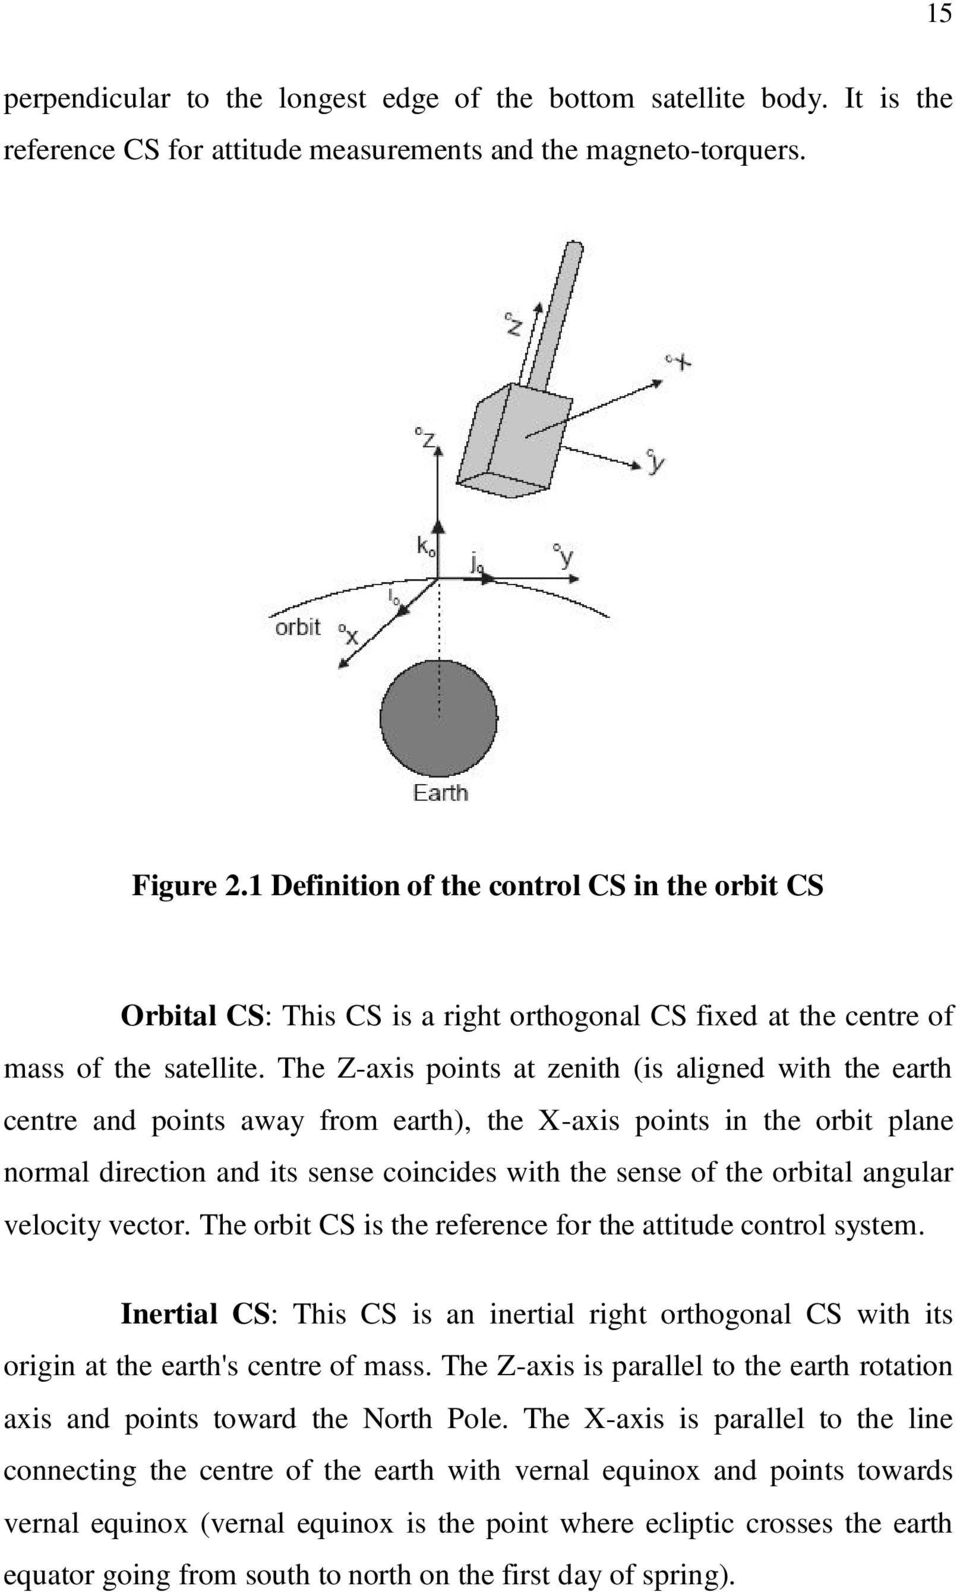 The Z-axis points at zenith (is aligned with the earth centre and points away from earth), the X-axis points in the orbit plane normal direction and its sense coincides with the sense of the orbital